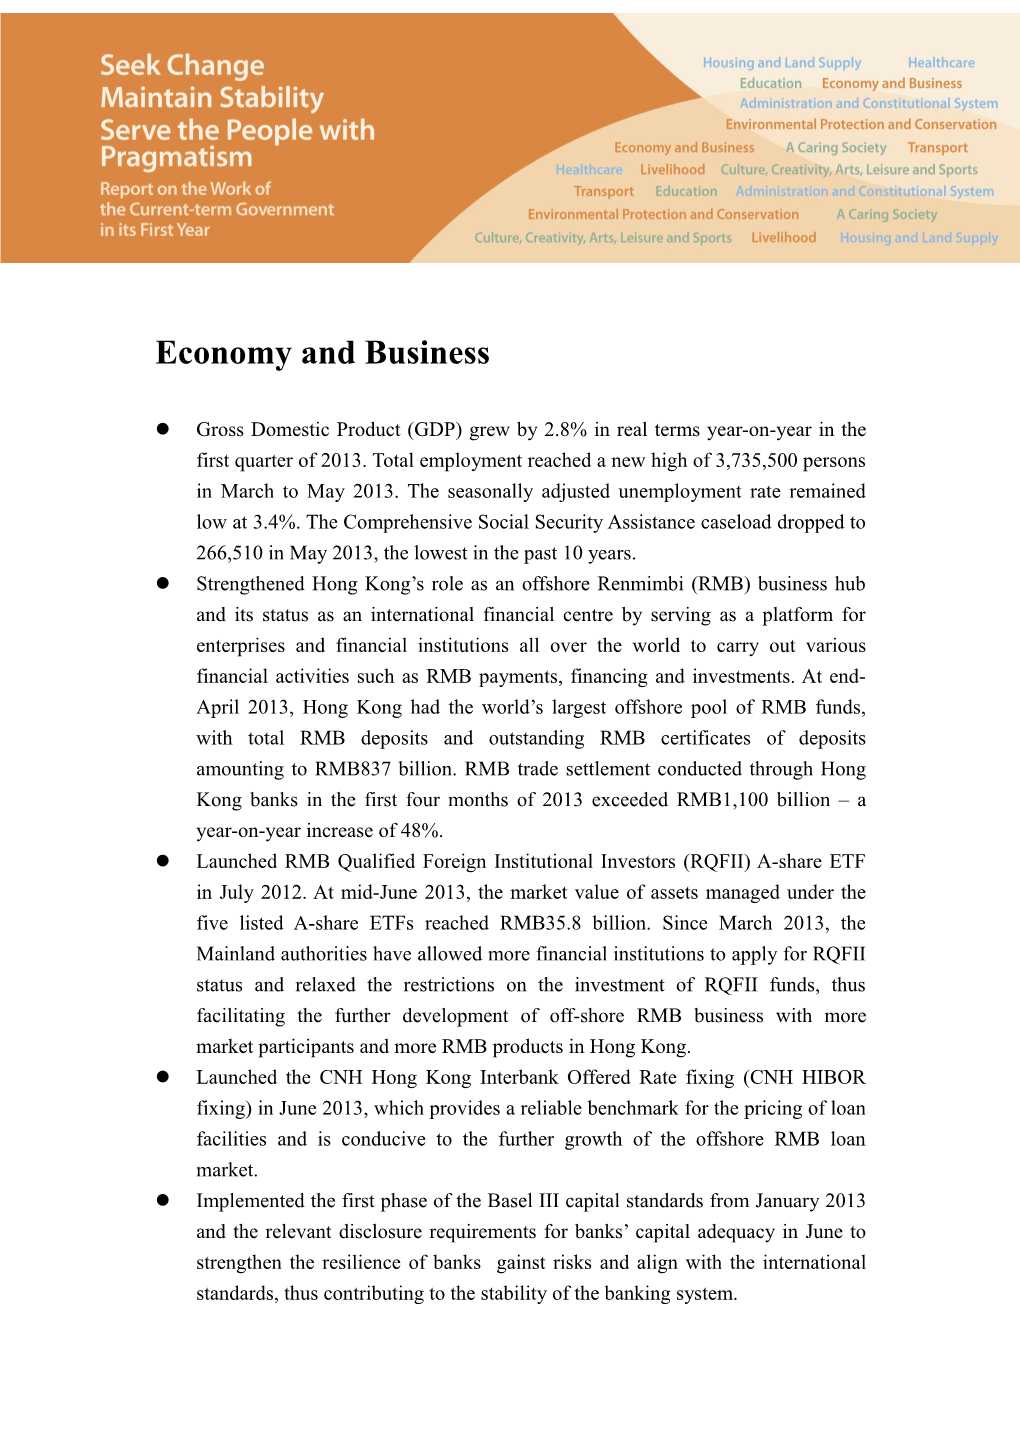 Economy and Business s1